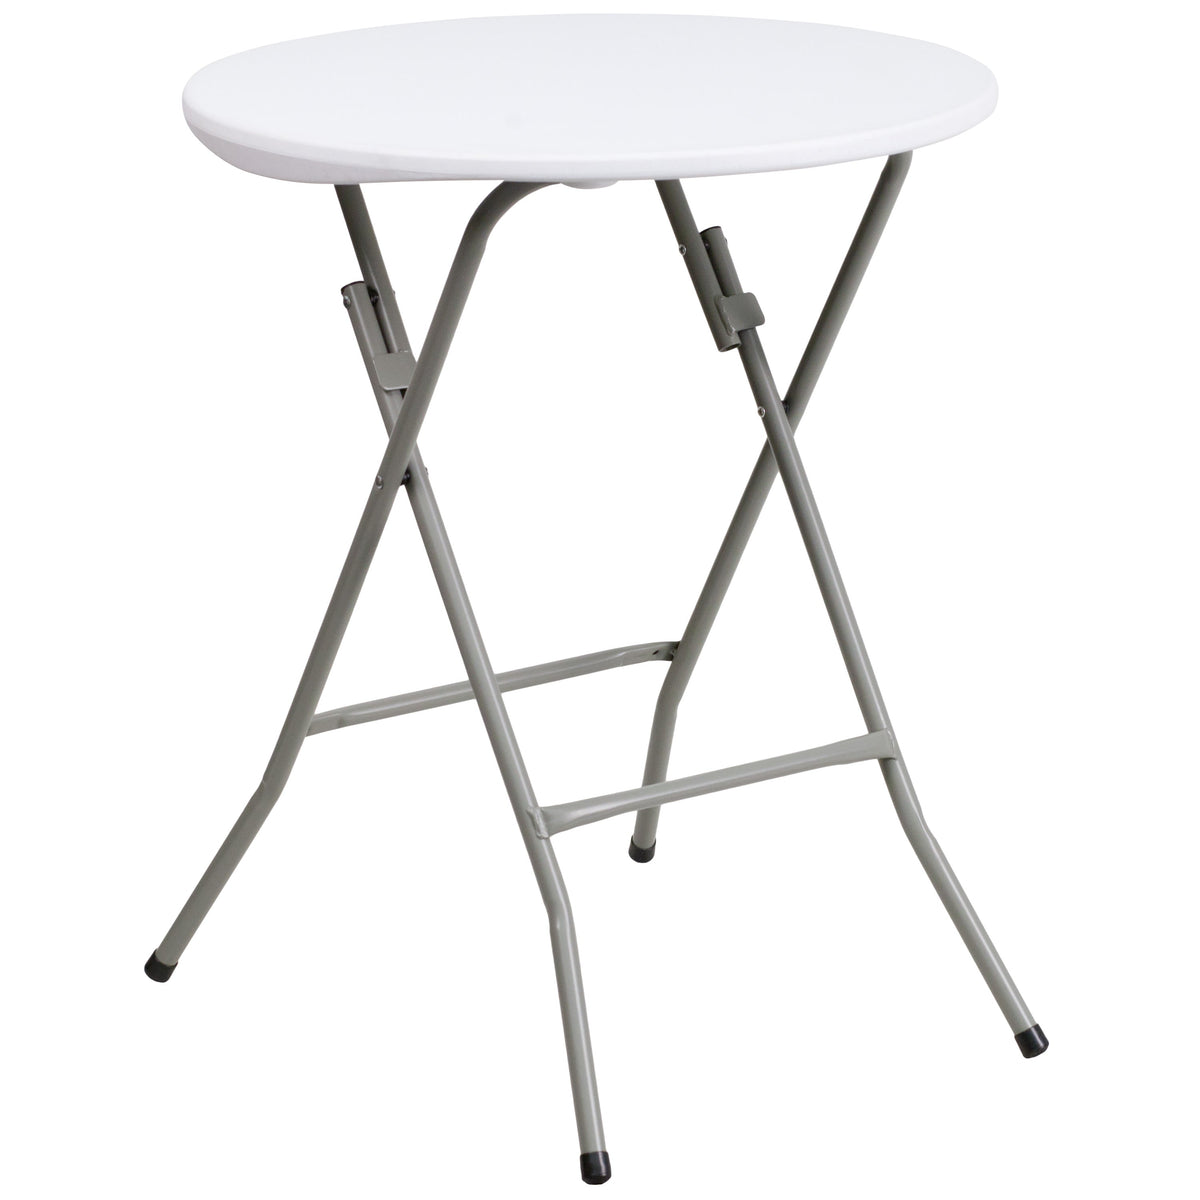 2-Foot Round Granite White Plastic Folding Table - Banquet / Event Folding Table